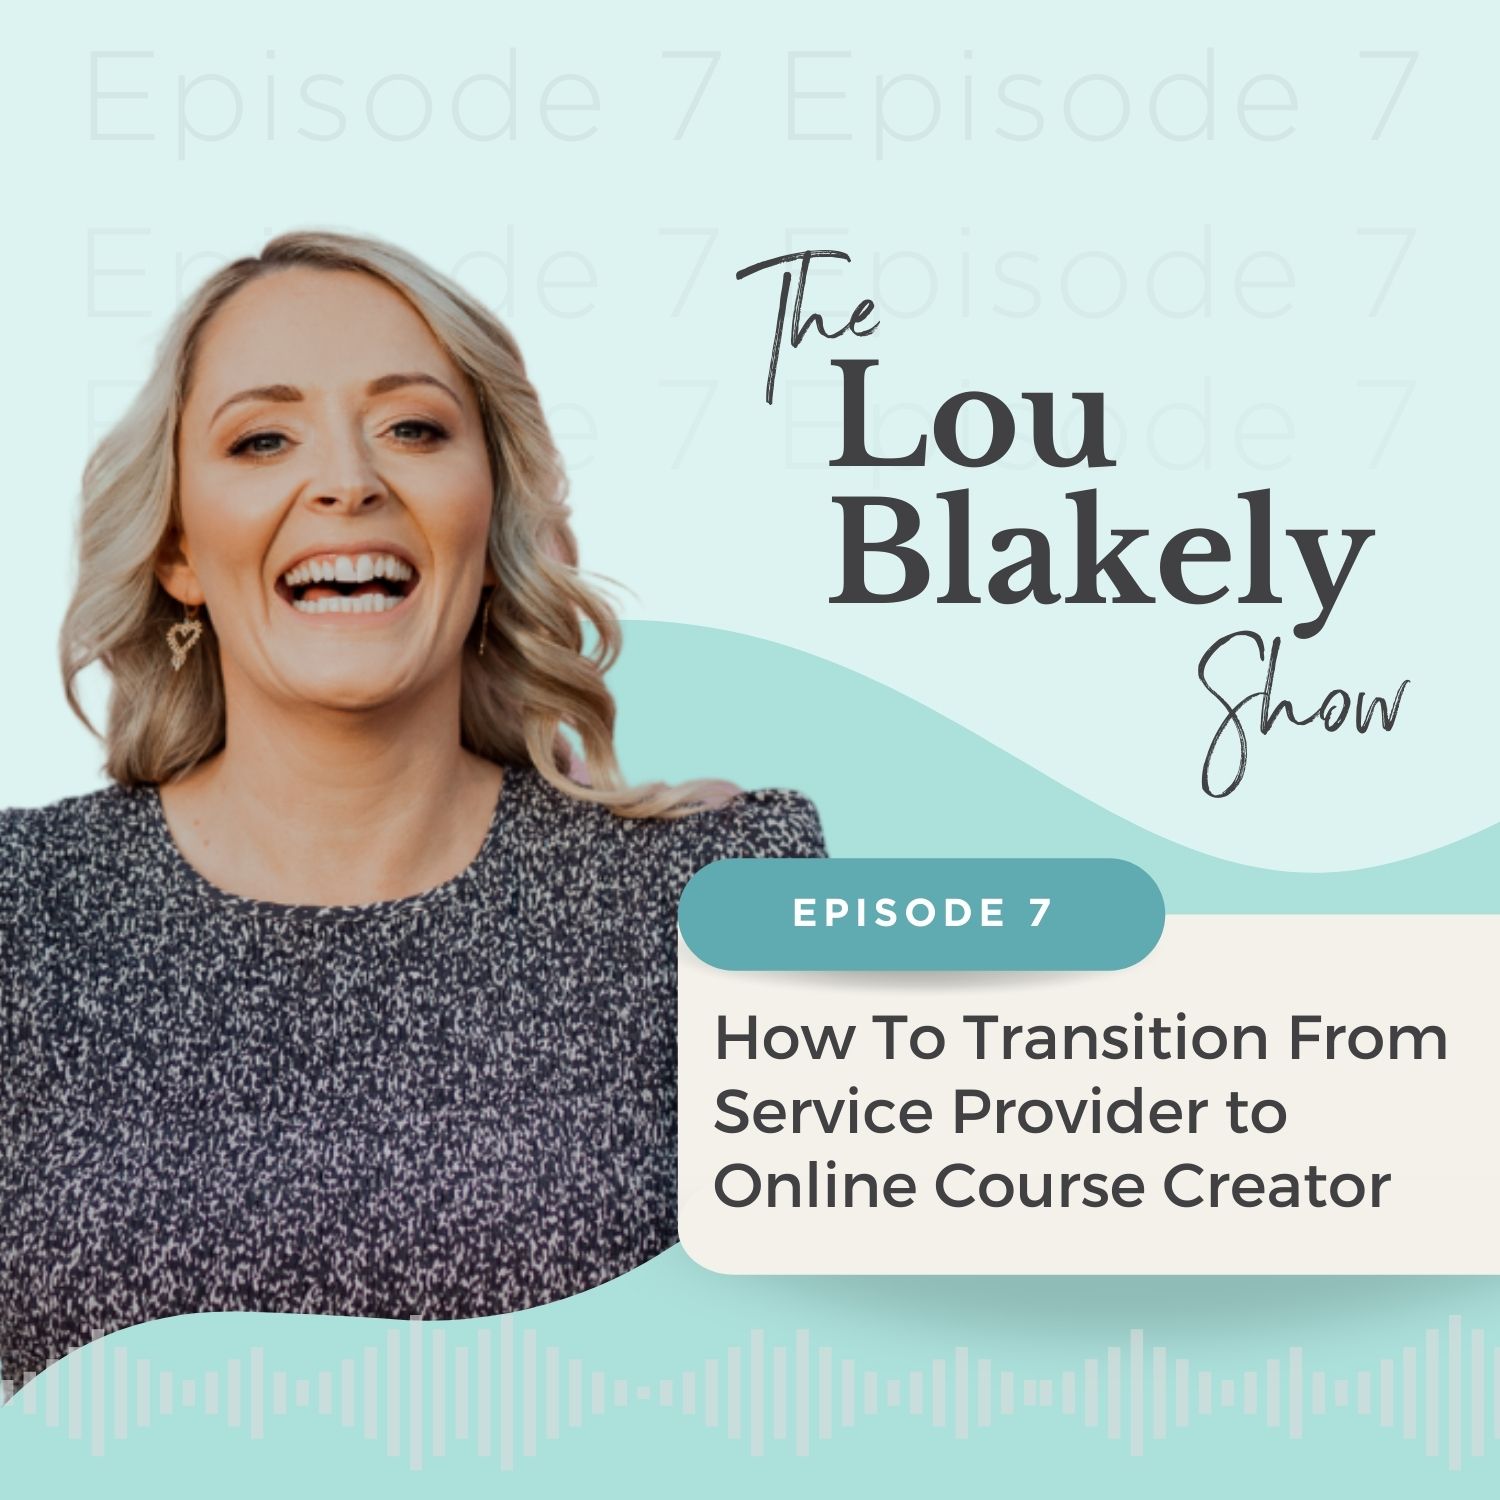 How to transition from service provider to online course creator